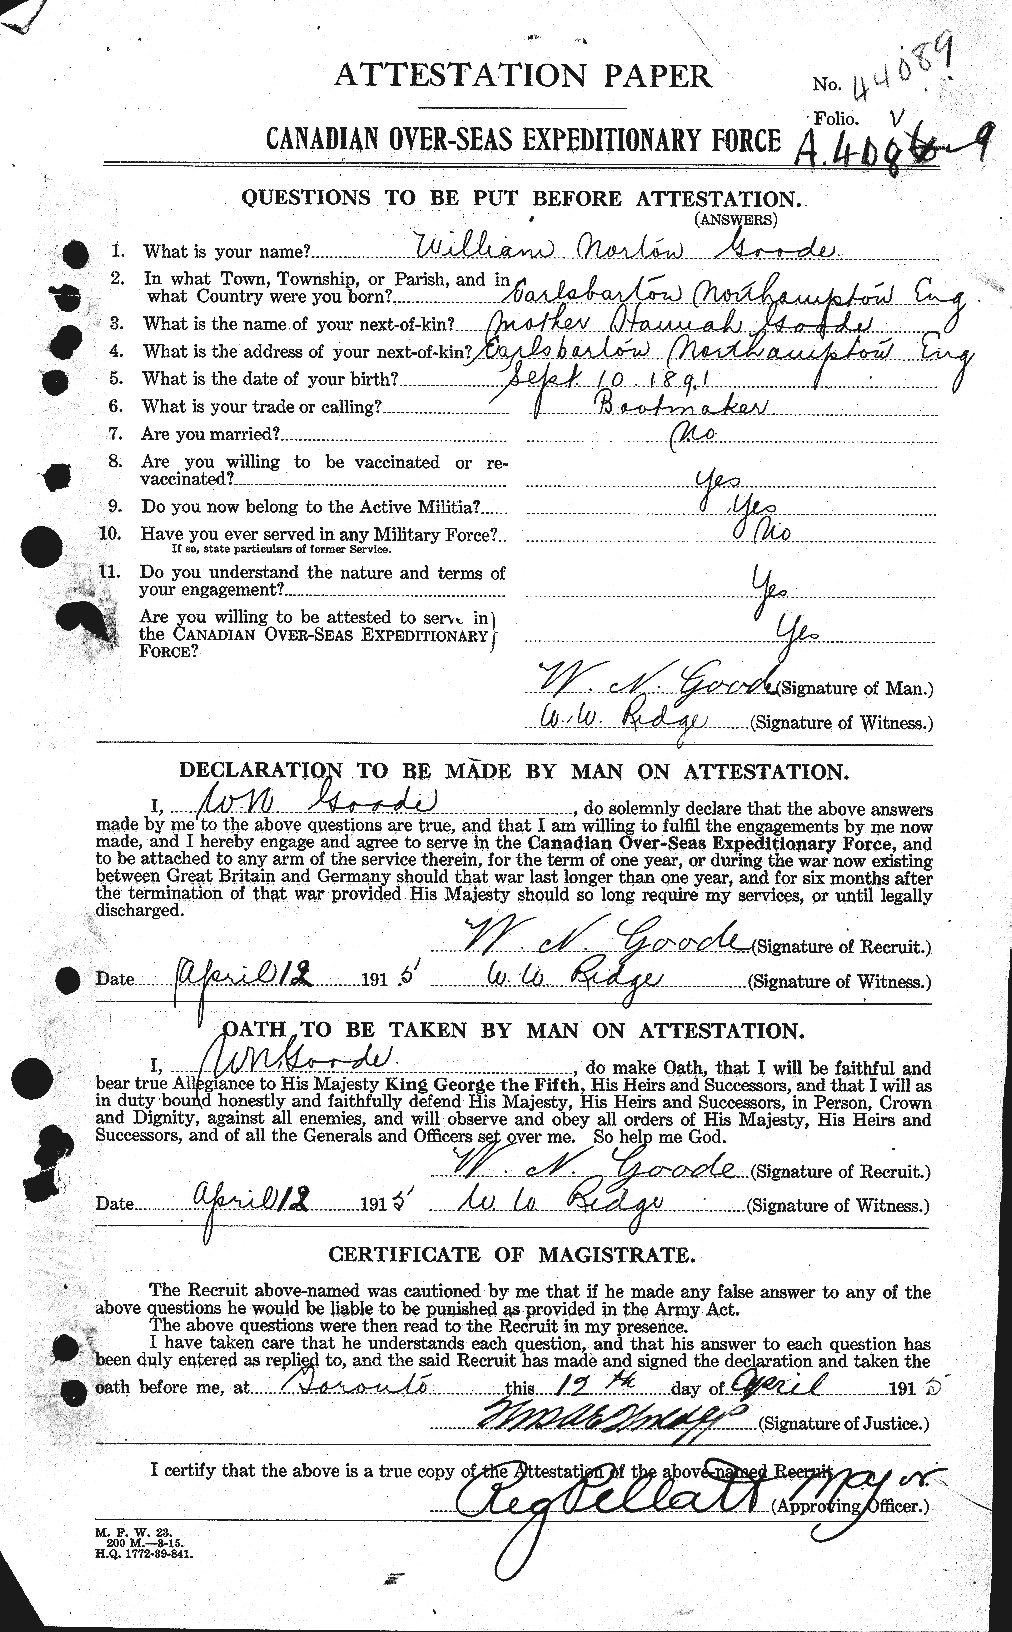 Personnel Records of the First World War - CEF 354293a